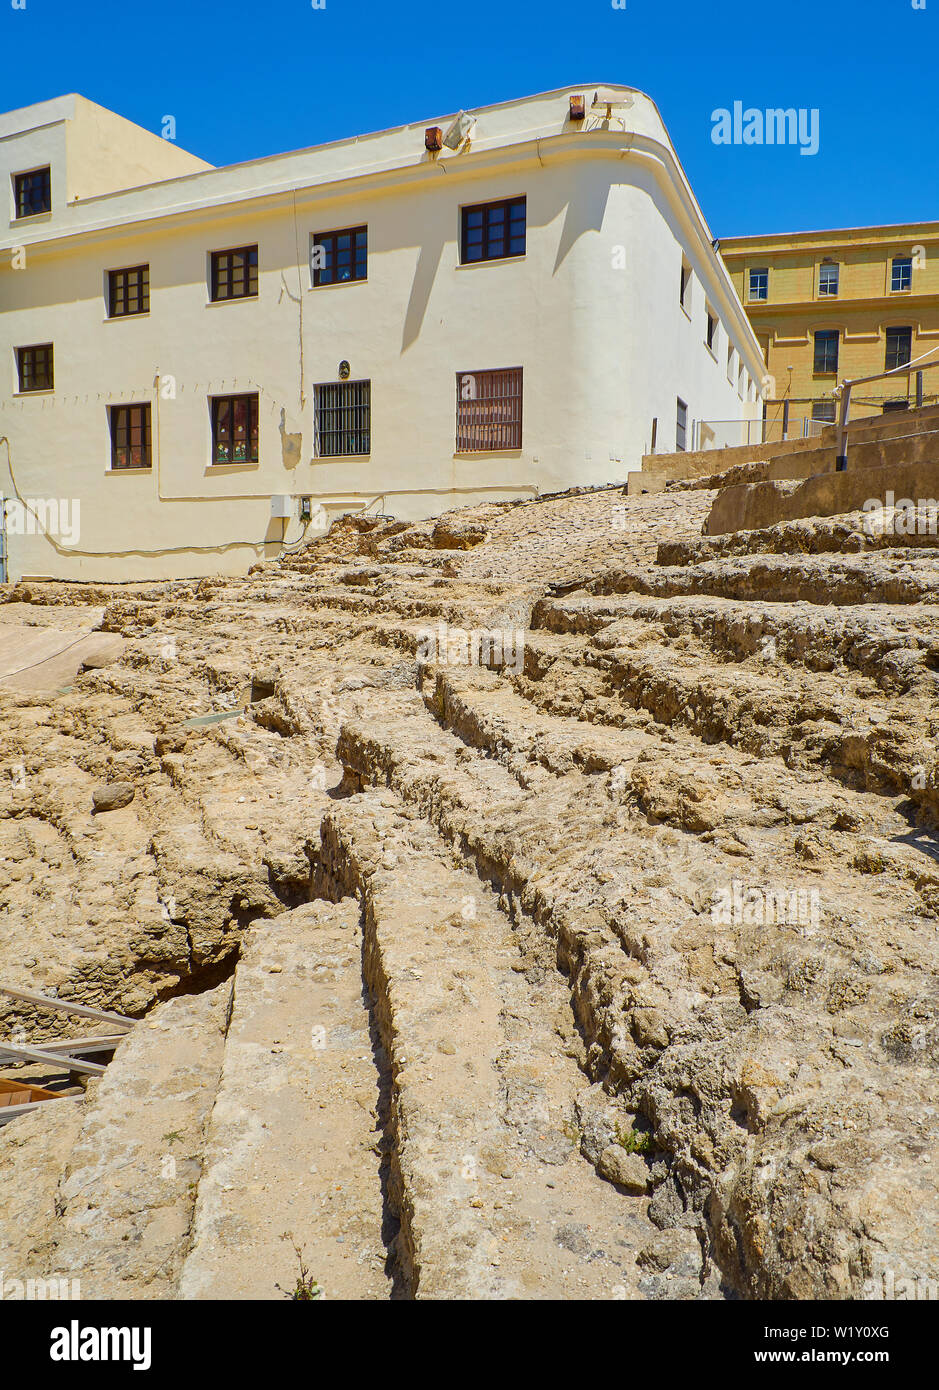 Parabolic tiered seating detail.Remains of the Roman Theatre of the ancient Gades in Hispania, the current city of Cadiz, Andalusia, Spain. Stock Photo